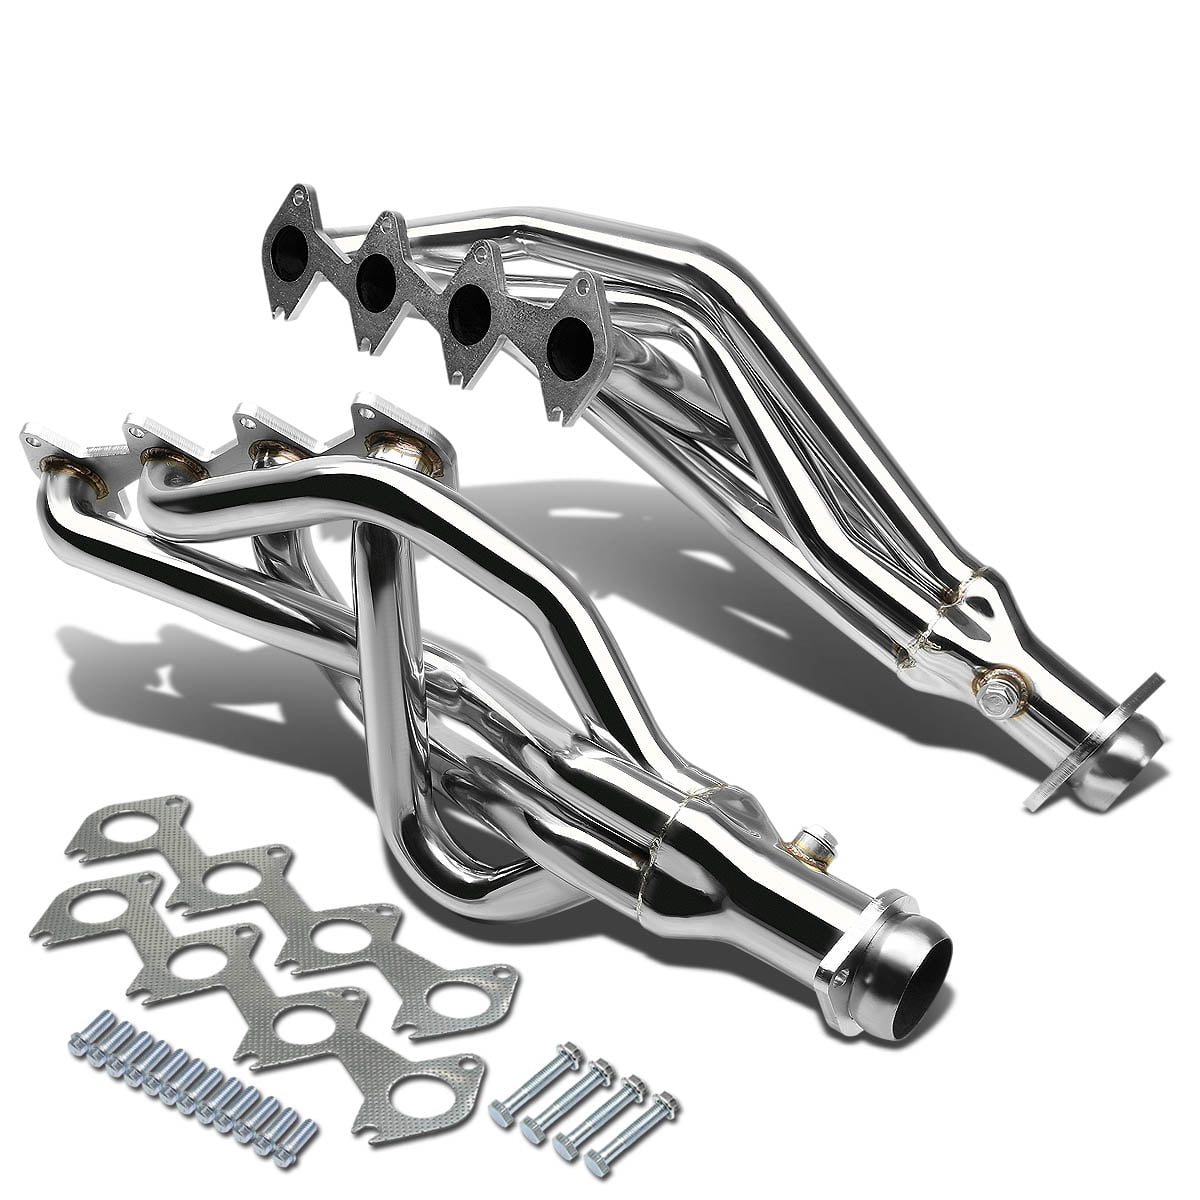 DNA Motoring HDS-FM05-46L-SHORTY Stainless Steel Exhaust Header Manifold 